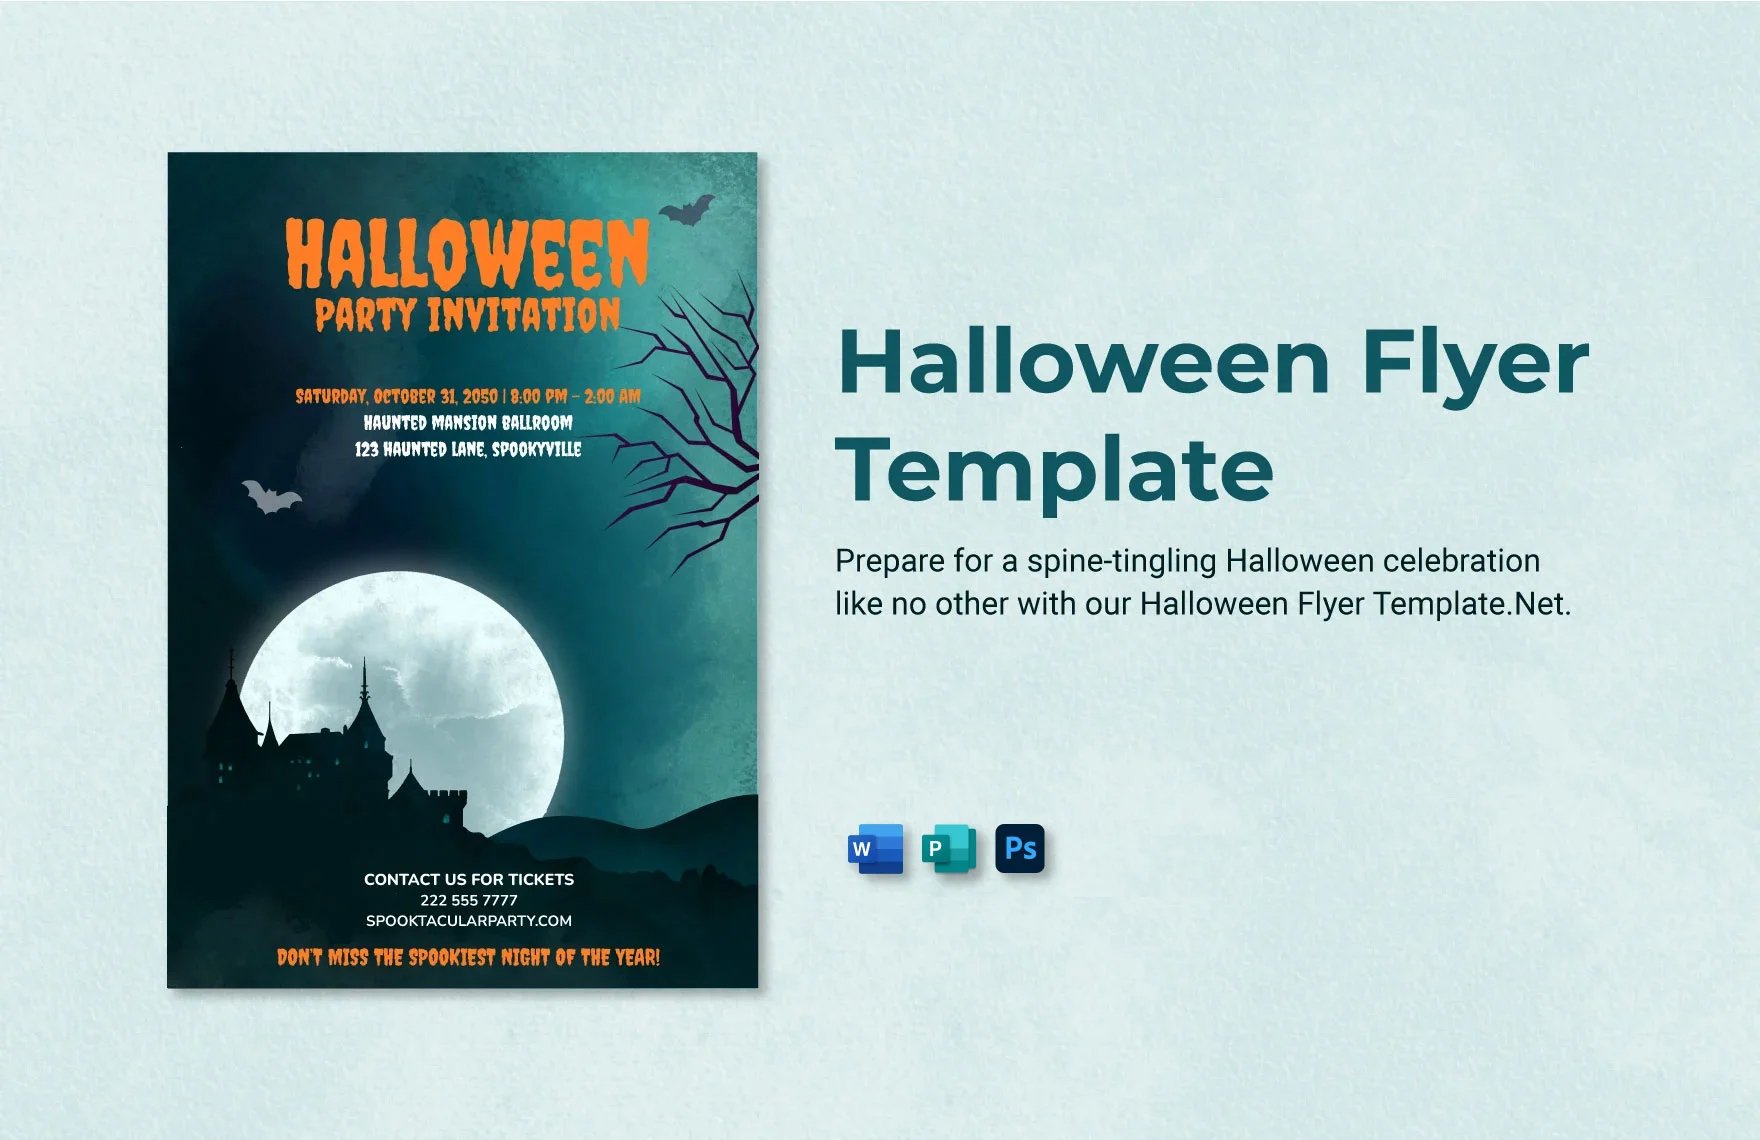 Free Halloween Flyer Template in Word, PSD, Publisher